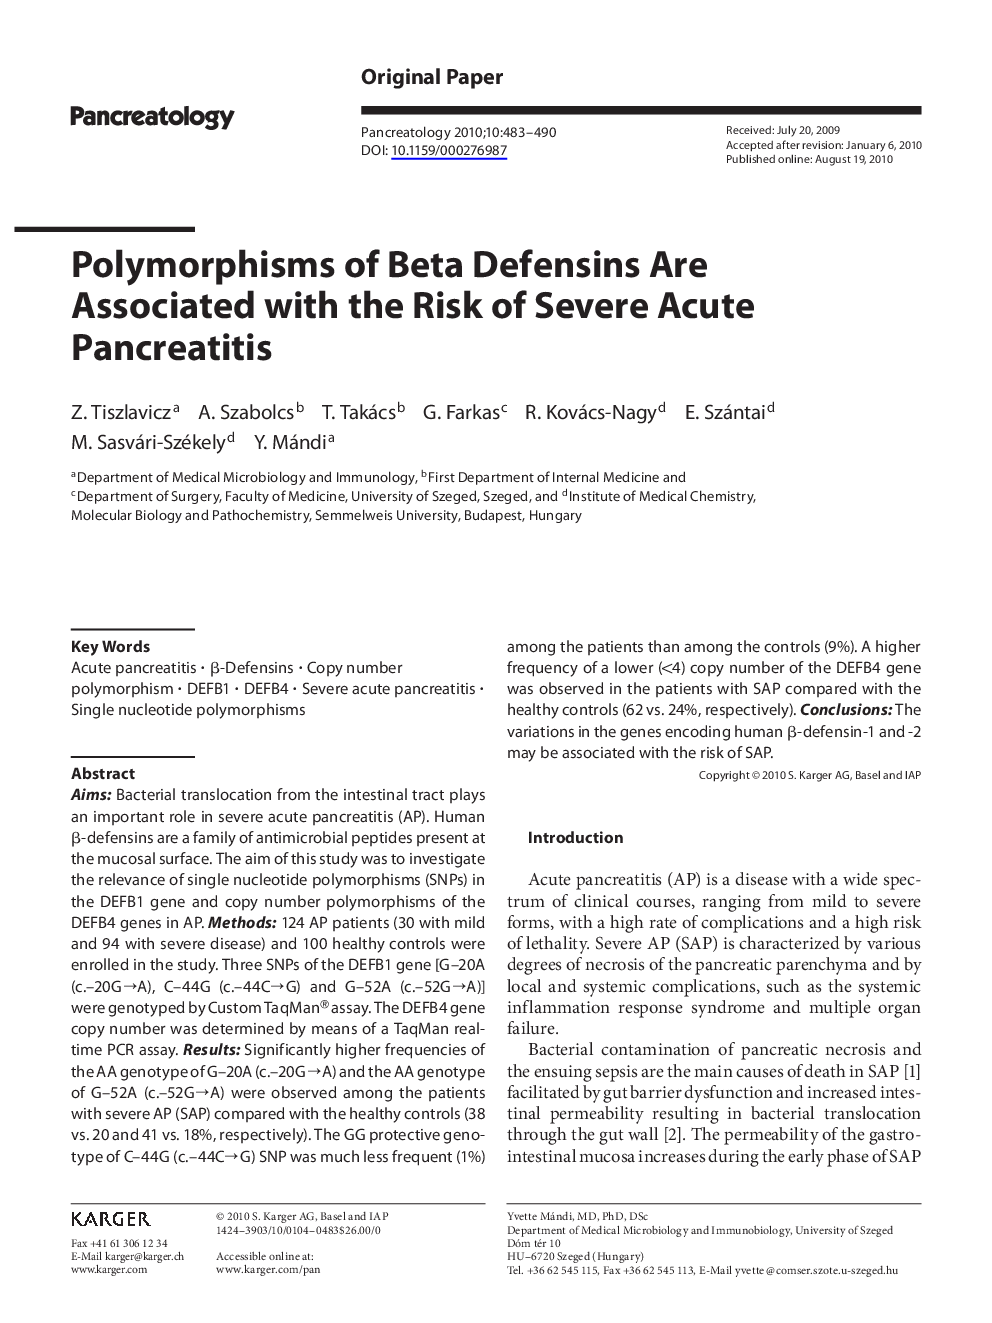 Polymorphisms of Beta Defensins Are Associated with the Risk of Severe Acute Pancreatitis